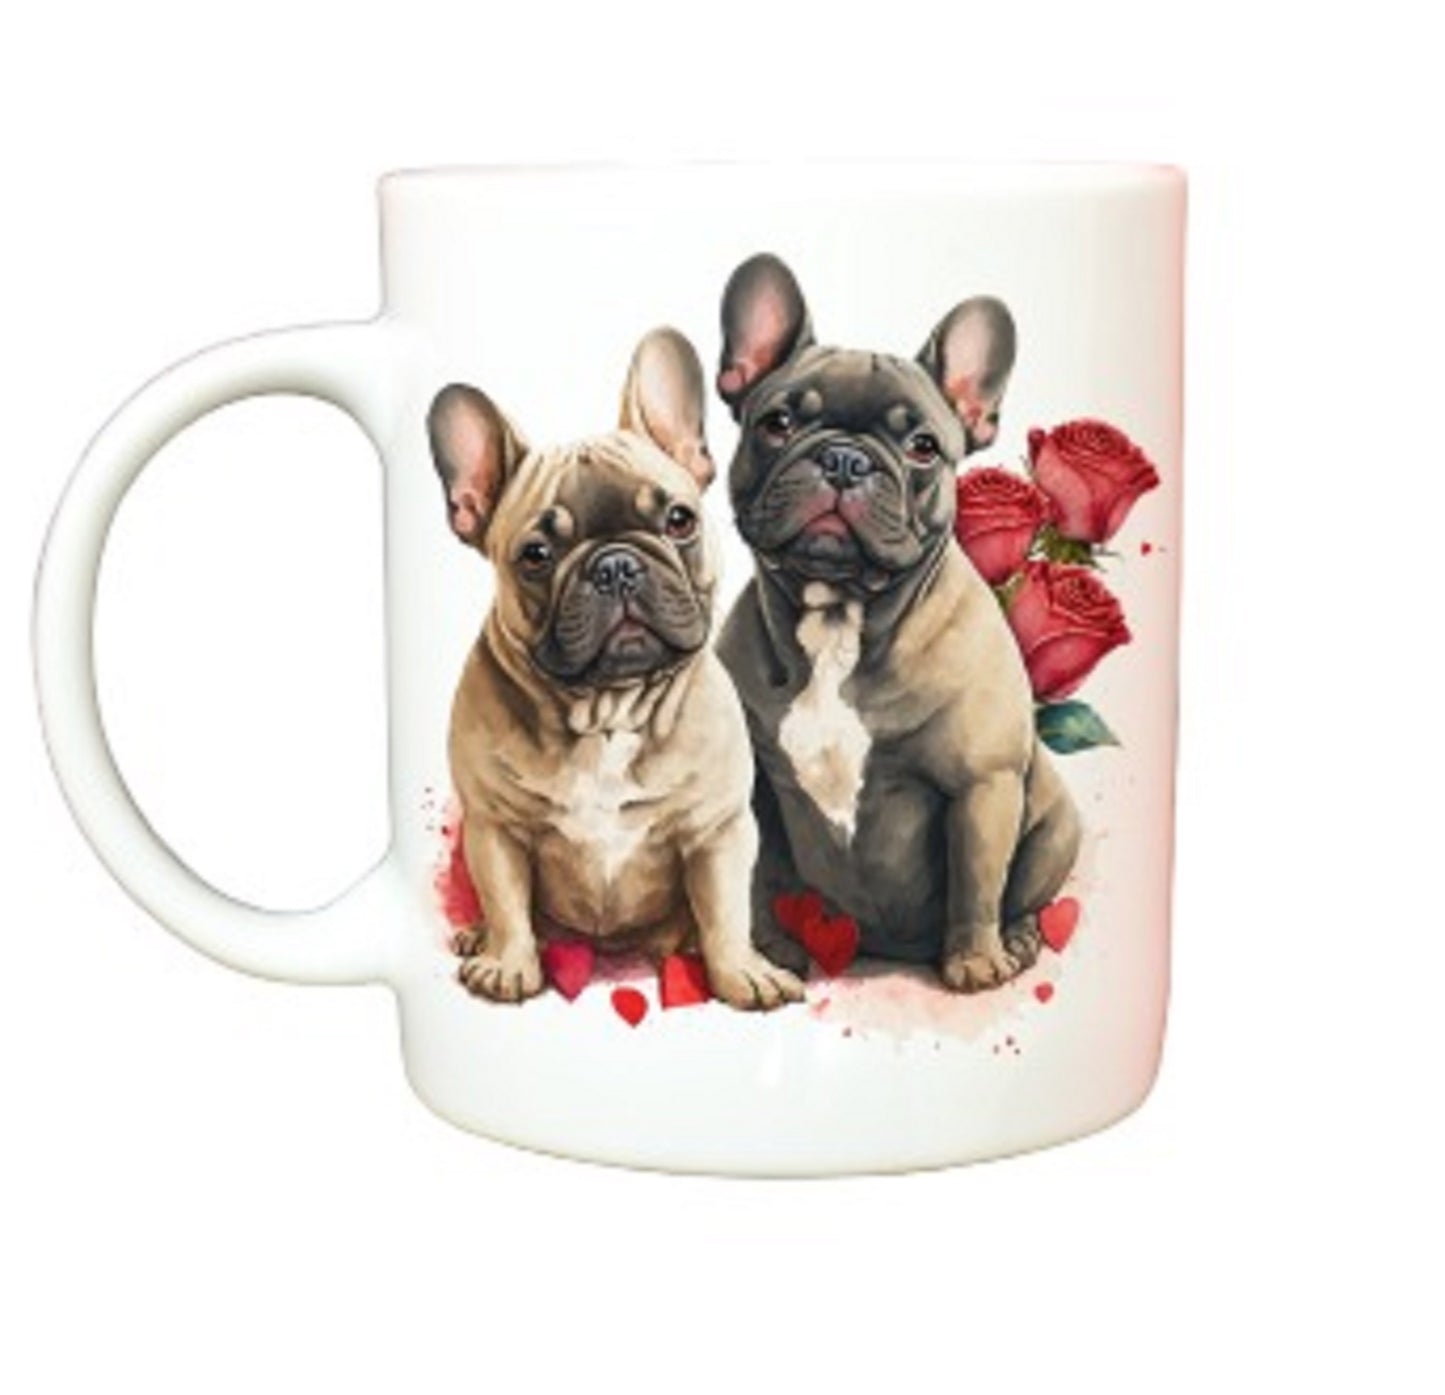  Three Different Styles of French Bulldog Mug by Free Spirit Accessories sold by Free Spirit Accessories